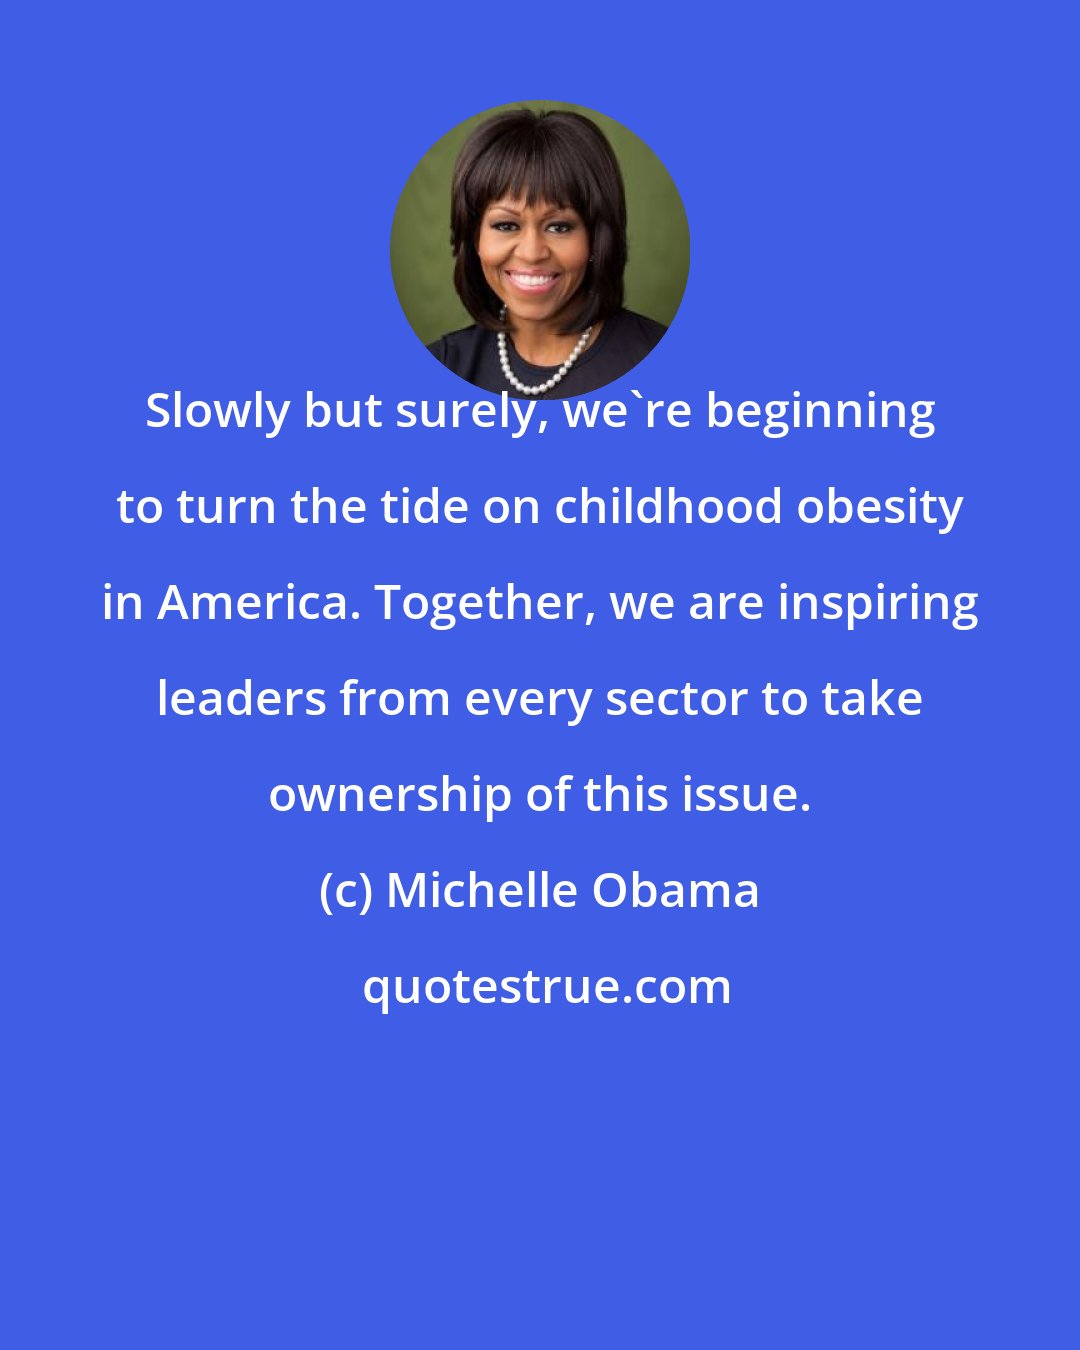 Michelle Obama: Slowly but surely, we're beginning to turn the tide on childhood obesity in America. Together, we are inspiring leaders from every sector to take ownership of this issue.